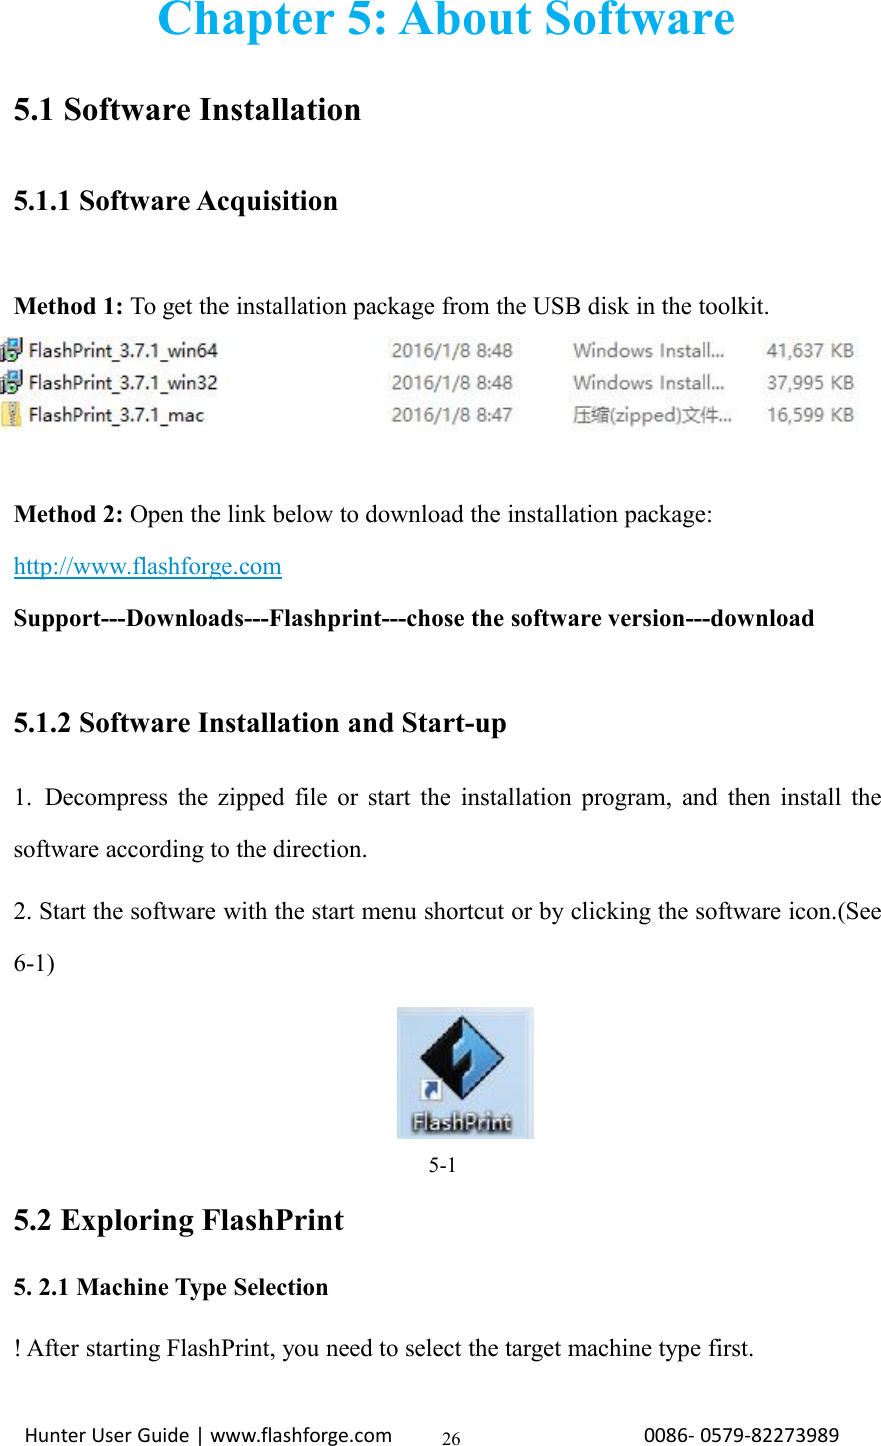 Hunter User Guide | www.flashforge.com 0086- 0579-8227398926Chapter 5: About Software5.1 Software Installation5.1.1 Software AcquisitionMethod 1: To get the installation package from the USB disk in the toolkit.Method 2: Open the link below to download the installation package:http://www.flashforge.comSupport---Downloads---Flashprint---chose the software version---download5.1.2 Software Installation and Start-up1. Decompress the zipped file or start the installation program, and then install thesoftware according to the direction.2. Start the software with the start menu shortcut or by clicking the software icon.(See6-1)5-15.2 Exploring FlashPrint5. 2.1 Machine Type Selection! After starting FlashPrint, you need to select the target machine type first.